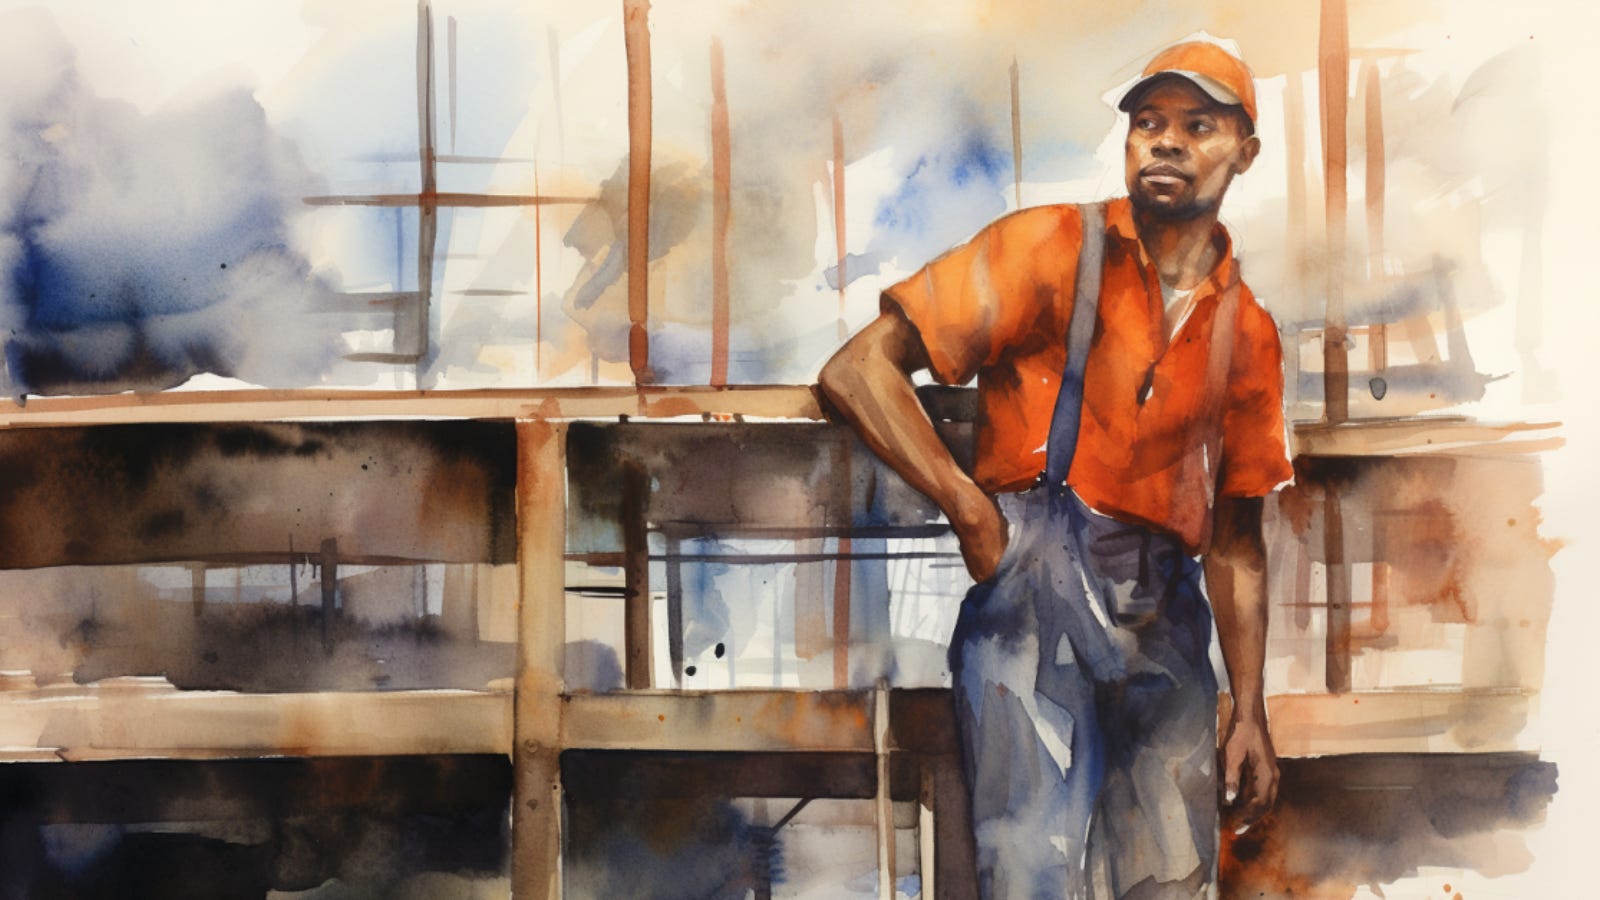 Watercolor sketch of a worker standing in a furniture factory.